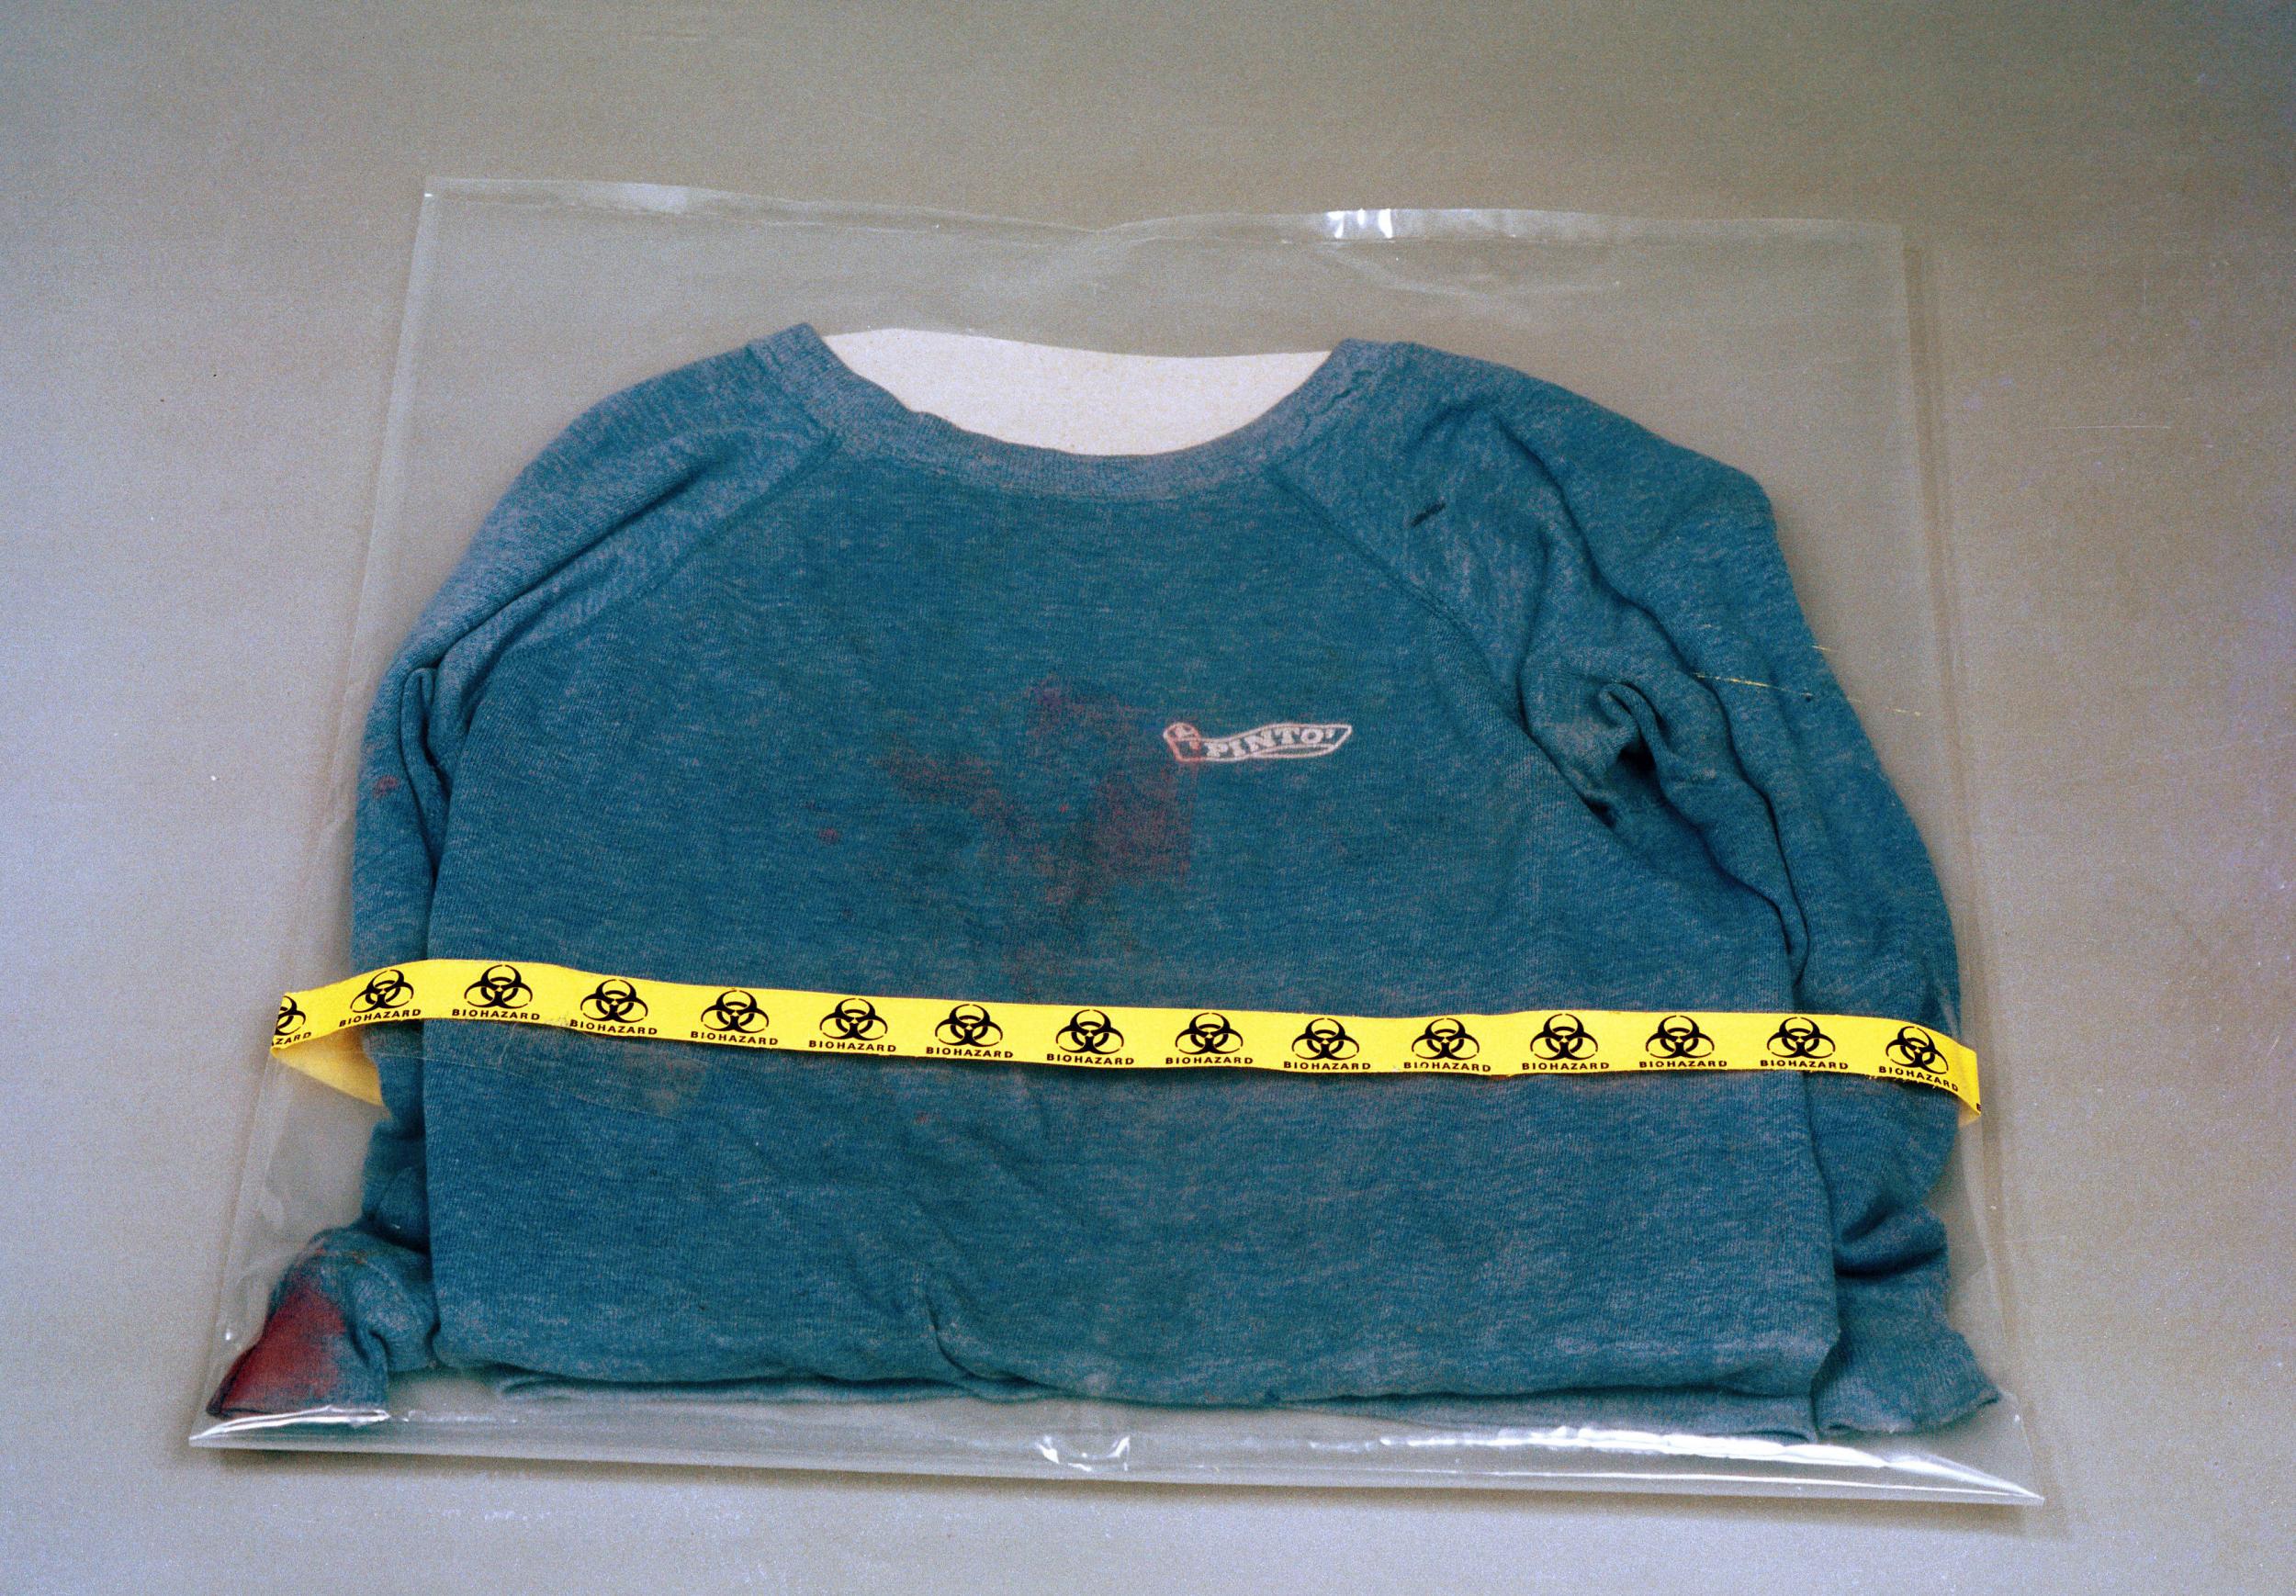 The police were always convinced that this Pinto-branded sweatshirt, discarded on the night of the murders, contained forensic proof that Bishop was the killer